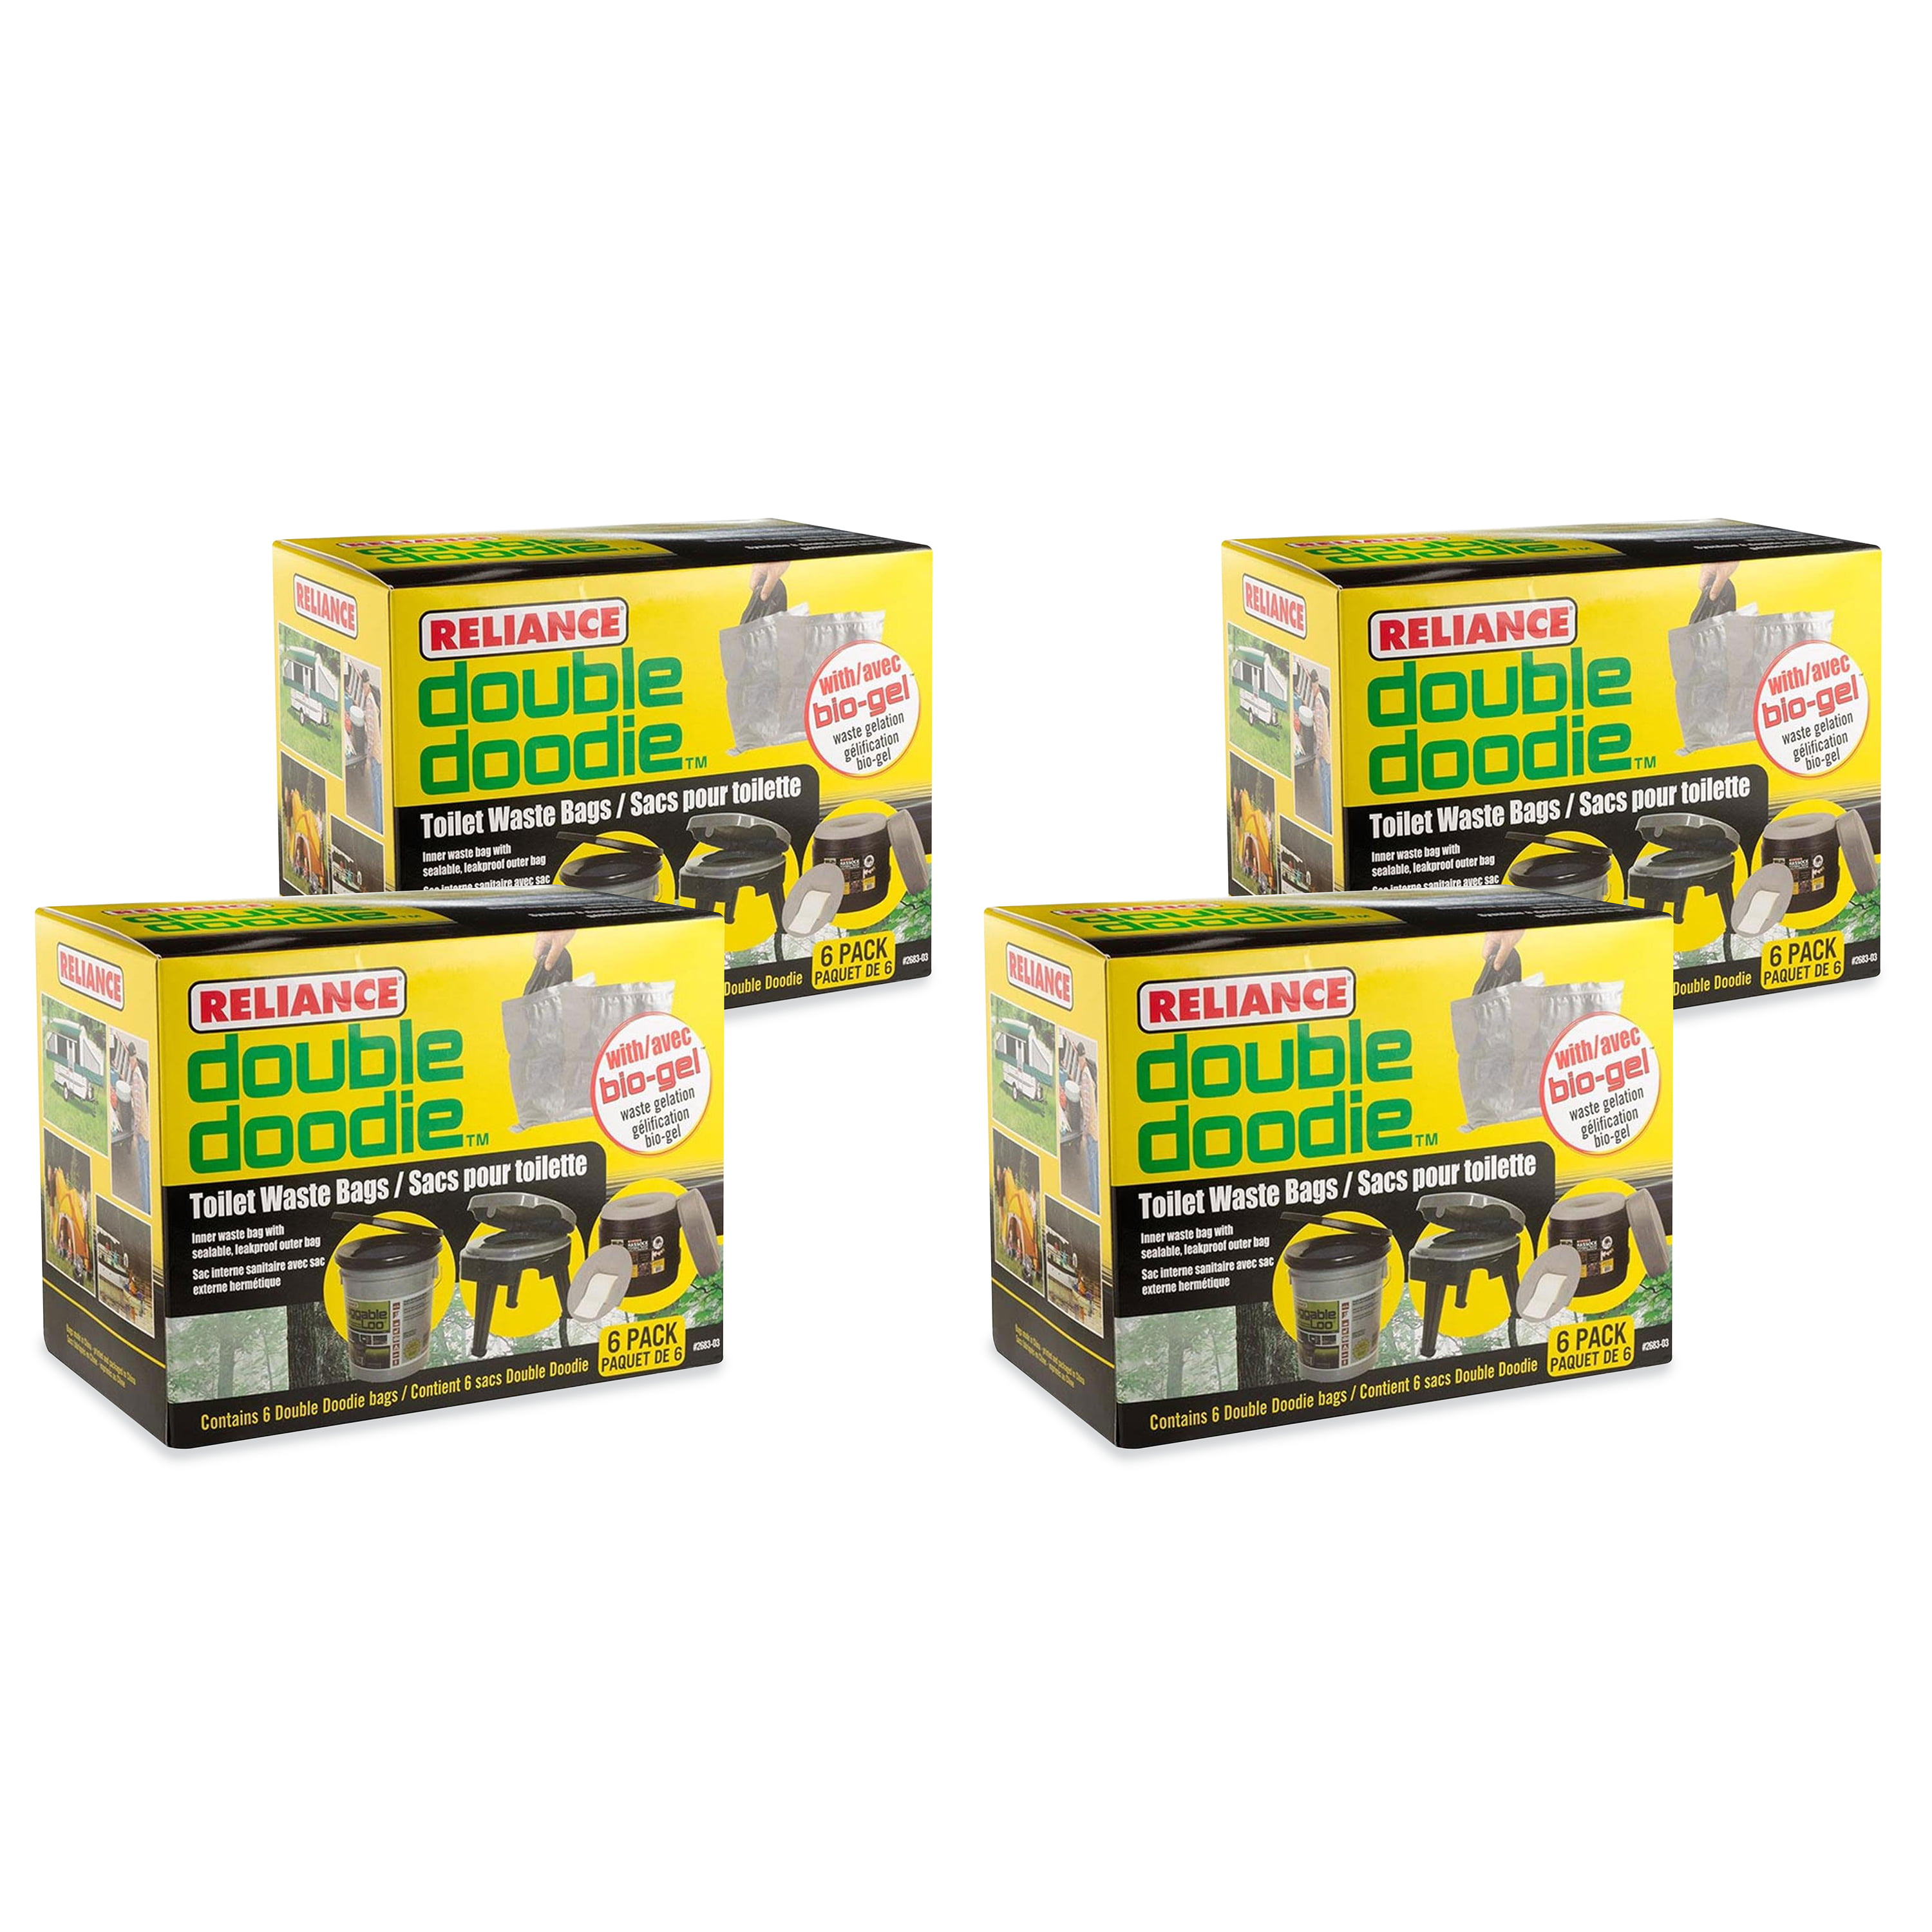 Reliance Double Doodie Portable Toilet Outdoor Waste Bags with Bio Gel 6 Pack 